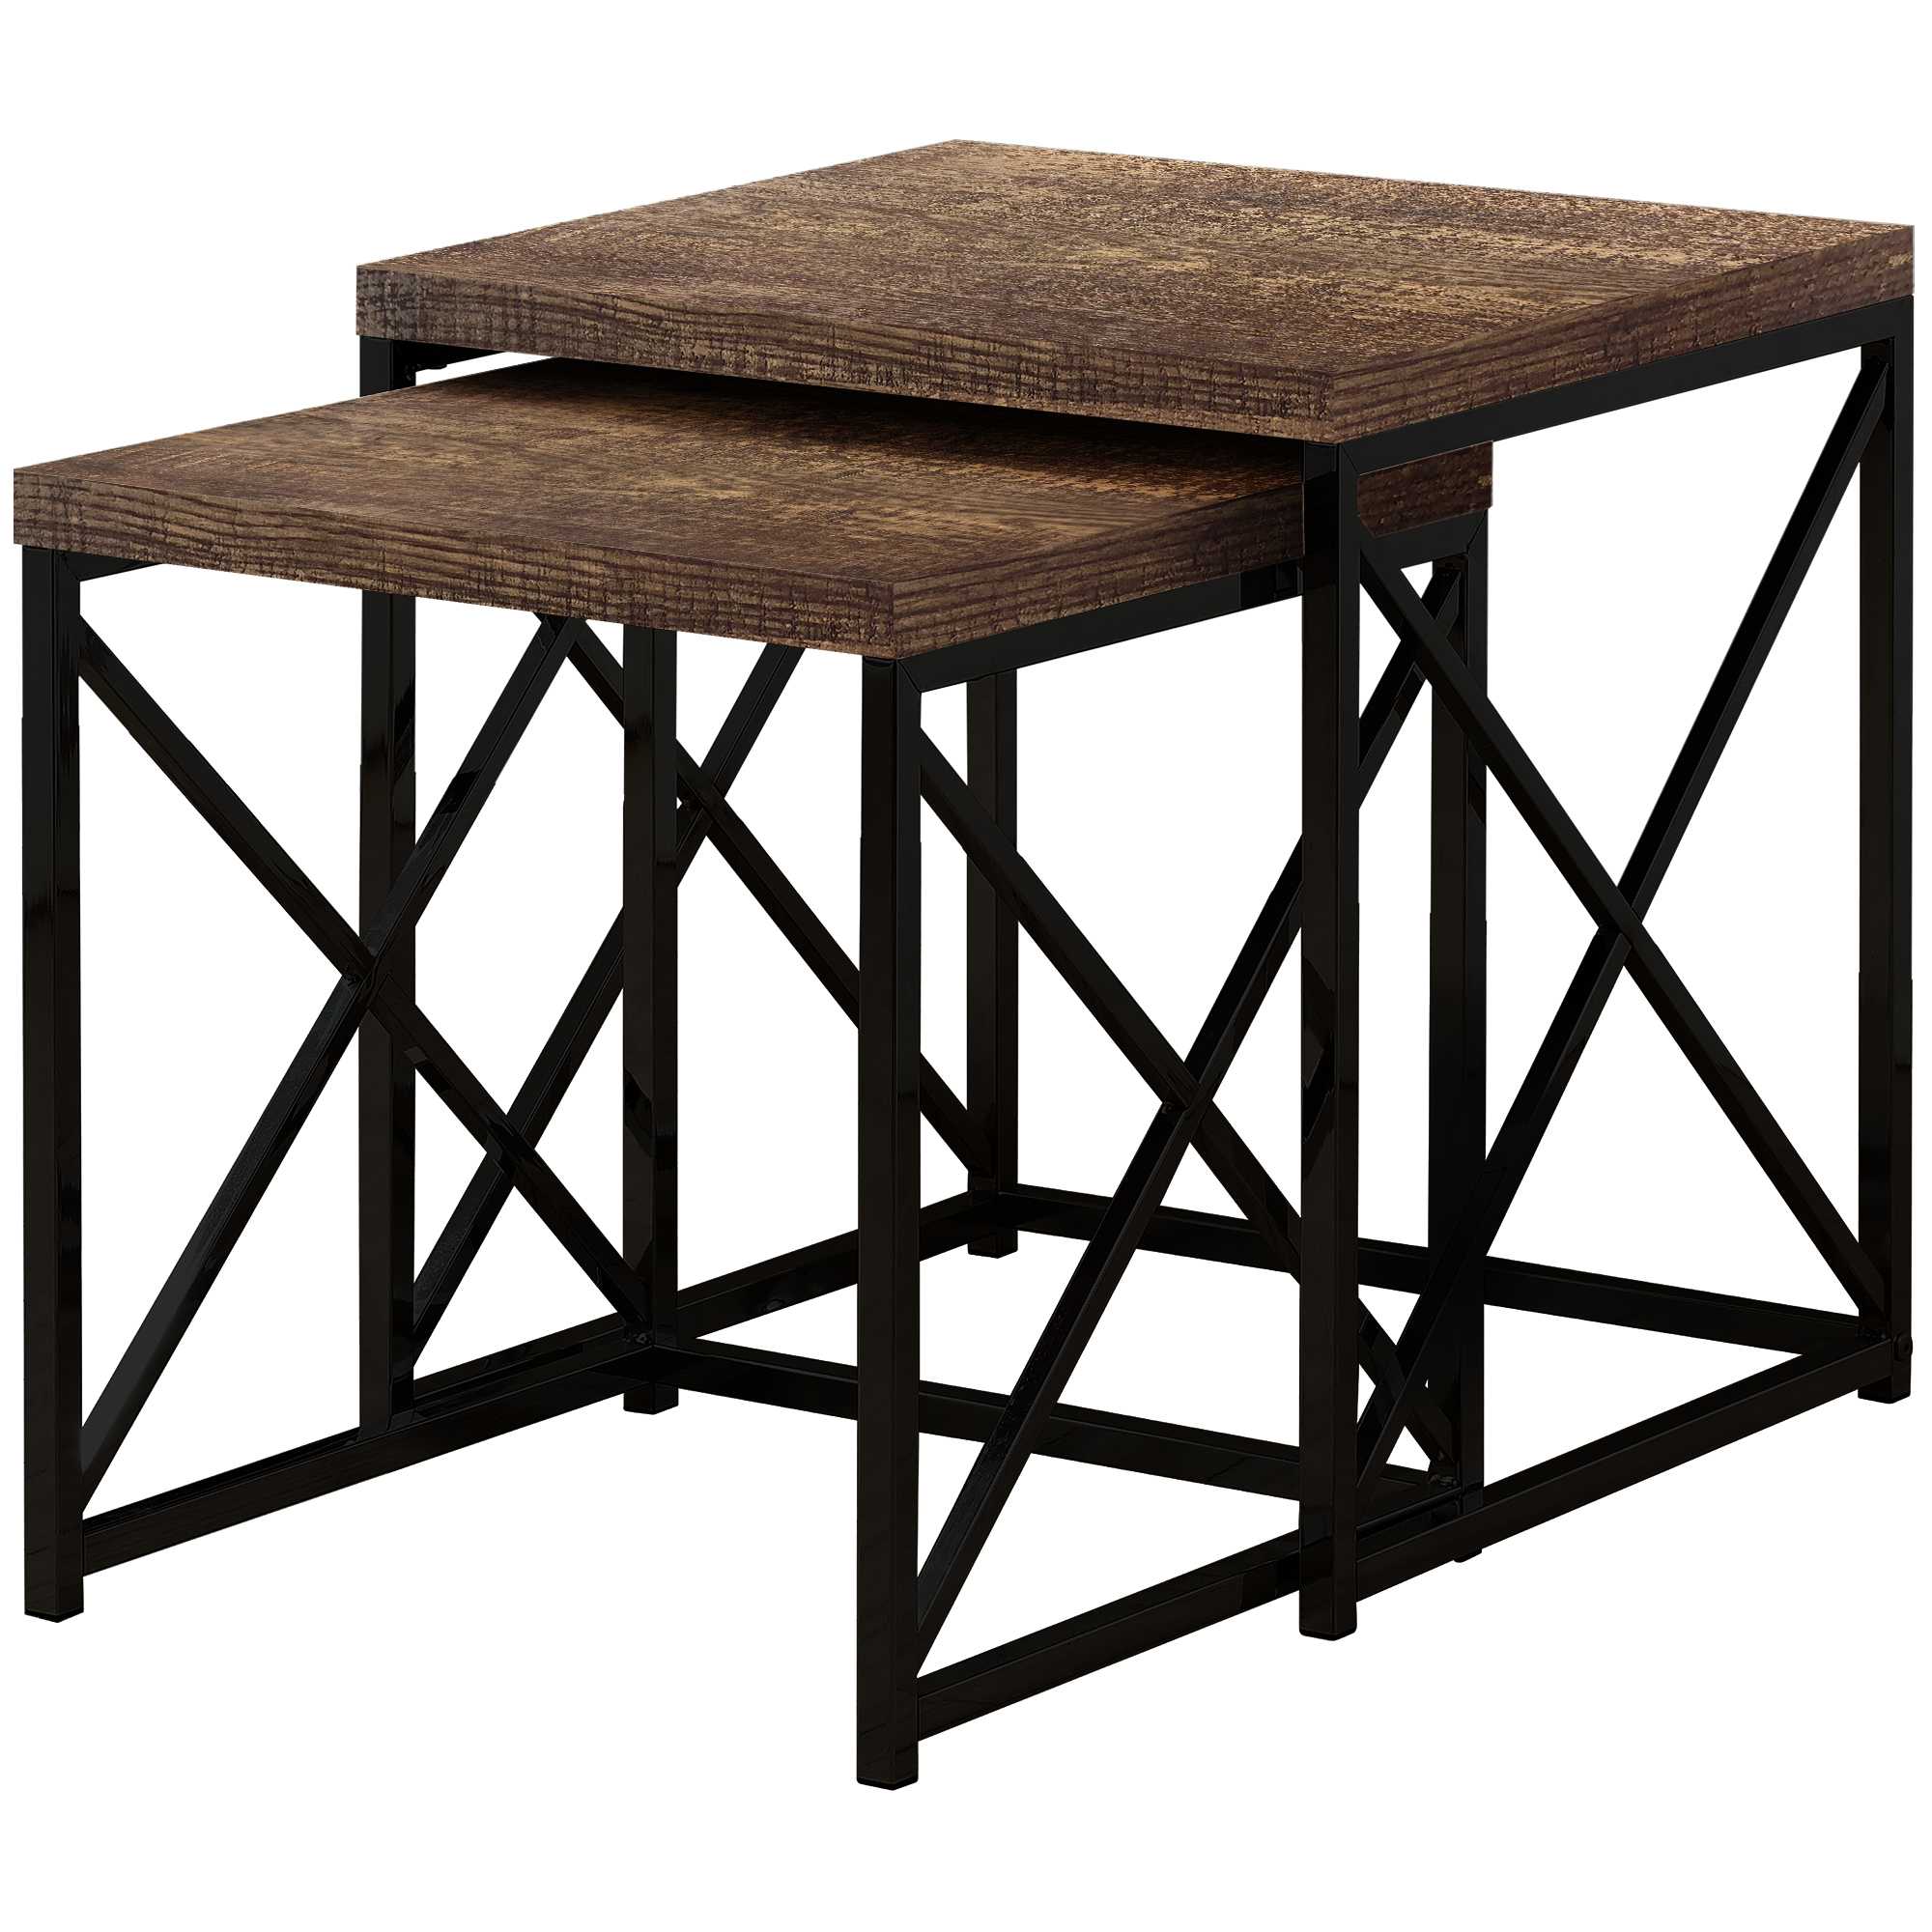 41" Black And Gray Nested Tables